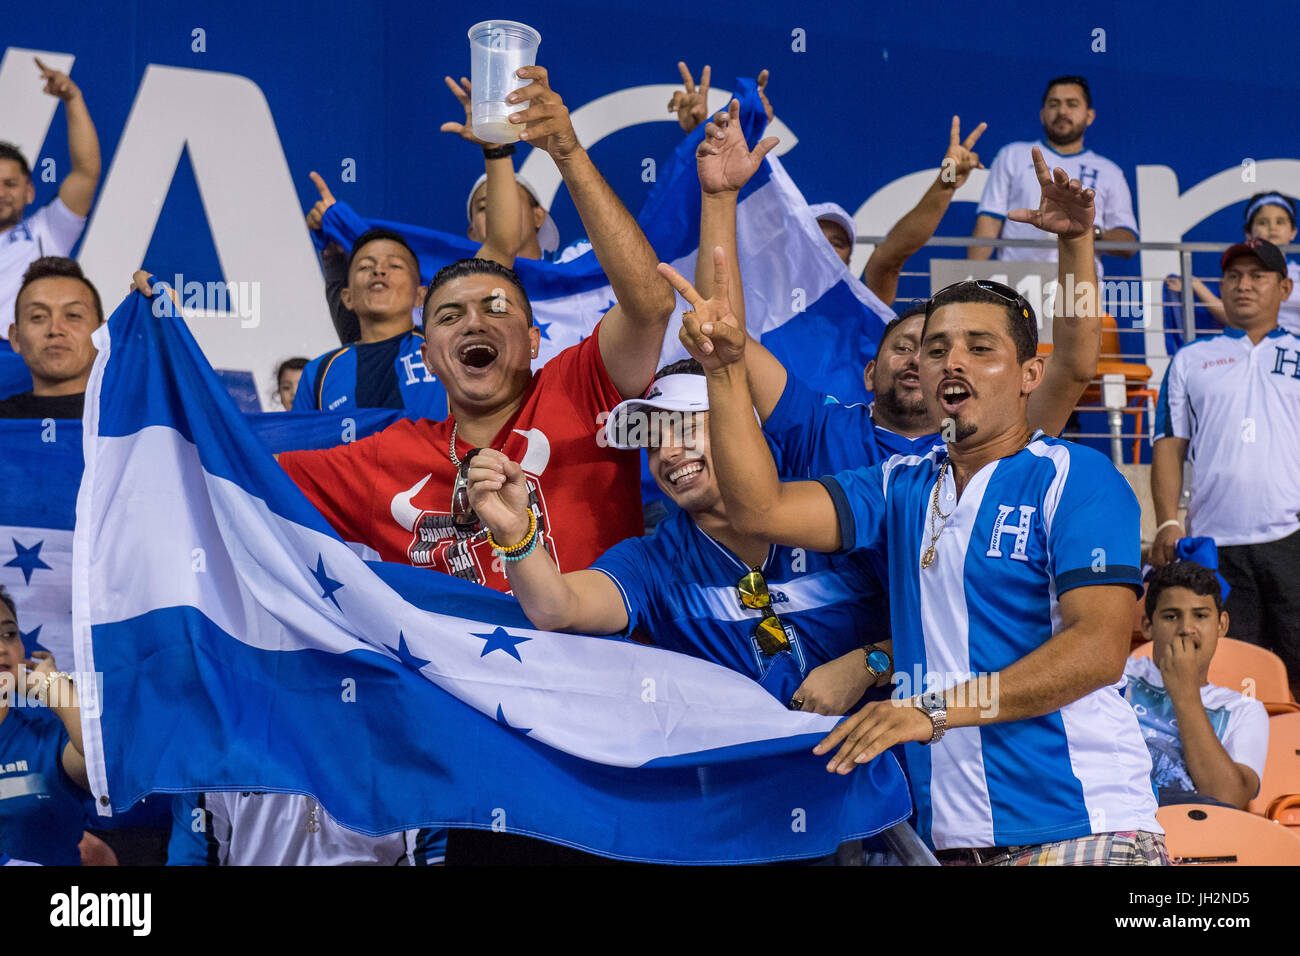 Houston, Texas, USA. 11th July, 2017. Honduras fans at an international CONCACAF Gold Cup soccer match between Honduras and French Guiana at BBVA Compass Stadium. The game ended in a 0-0 draw. Credit: Trask Smith/ZUMA Wire/Alamy Live News Stock Photo